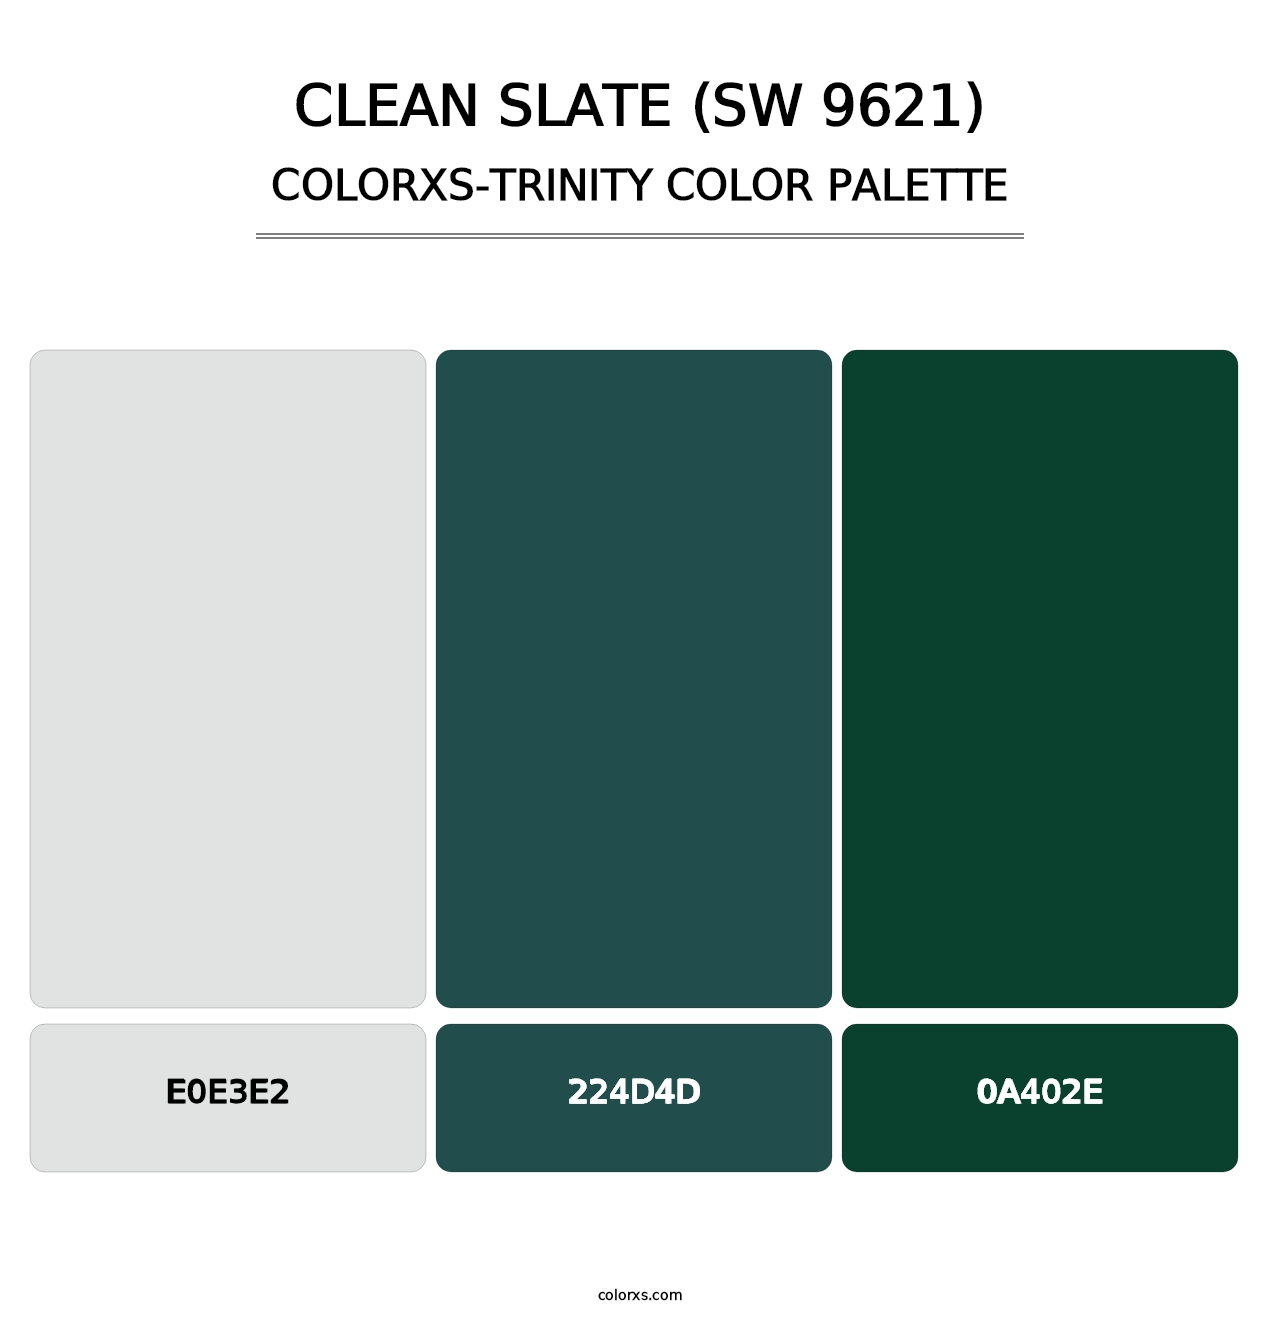 Clean Slate (SW 9621) - Colorxs Trinity Palette